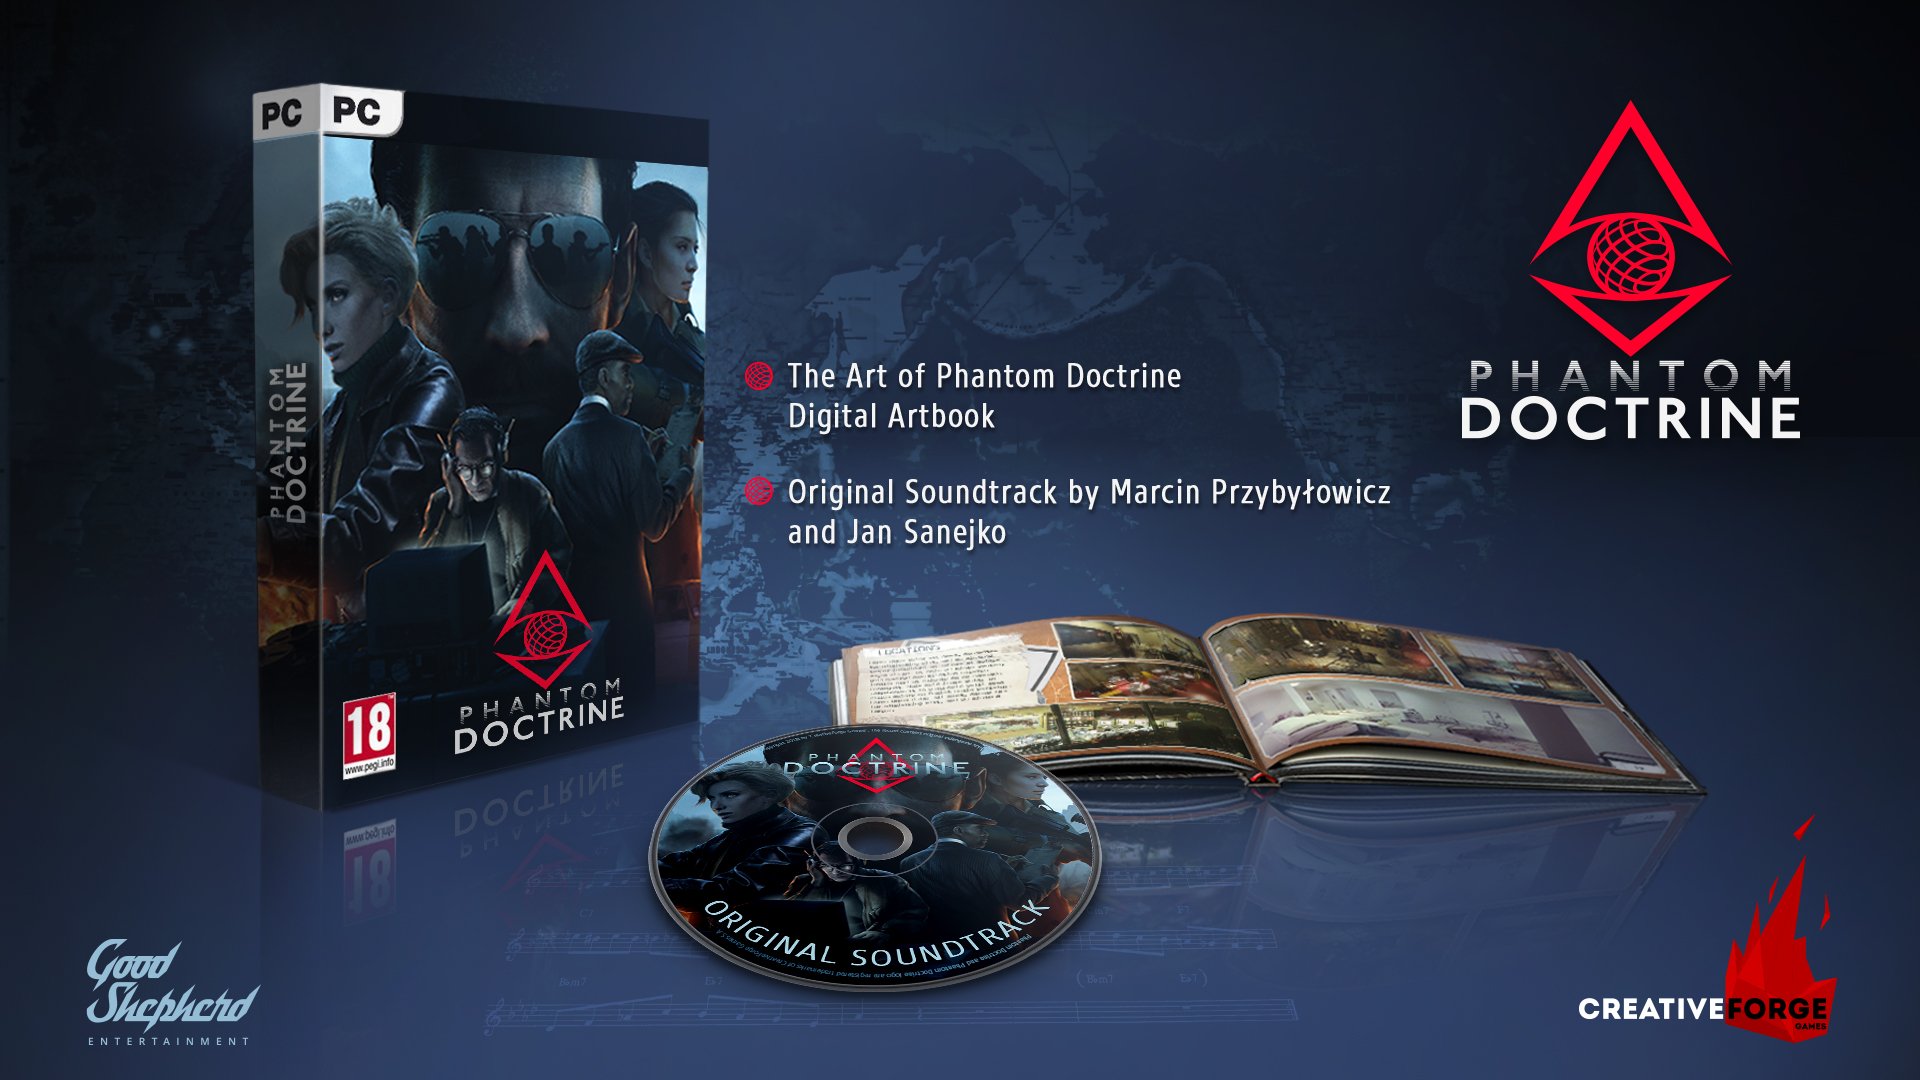 Phantomdoctrine Pc Ps4 Xbox One On Twitter A Lot Of You Have Been Asking About The Possibility To Pre Order Phantom Doctrine The Mission Was Finally Greenlit And Will Be Conducted With